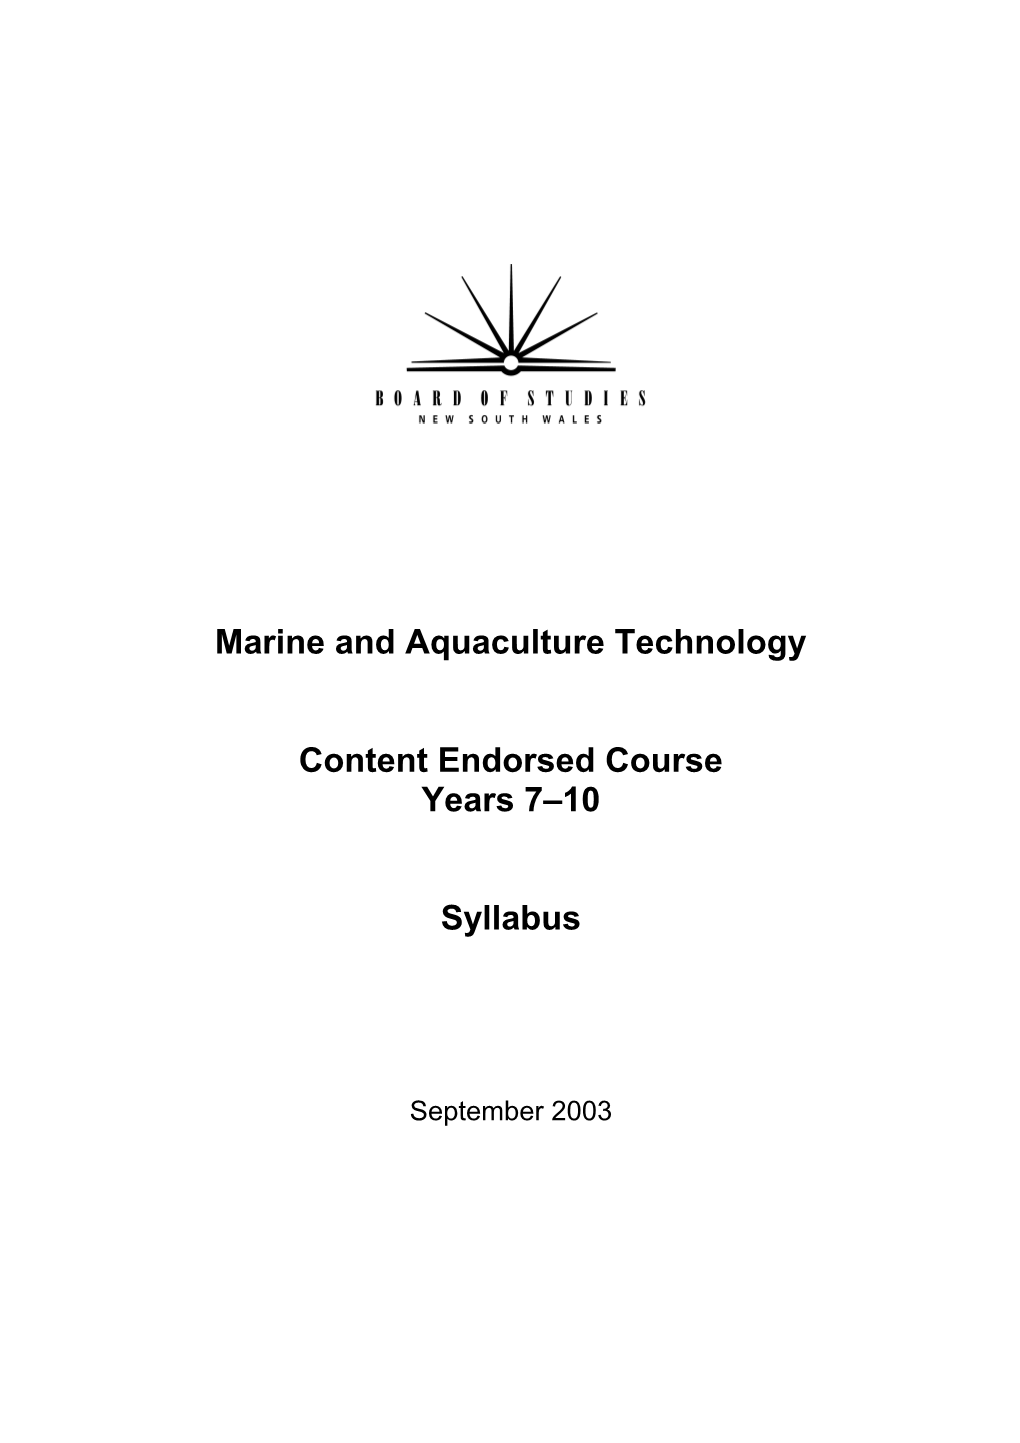 Marine and Aquaculture Technology Content Endorsed Course Years 7-10 Syllabus